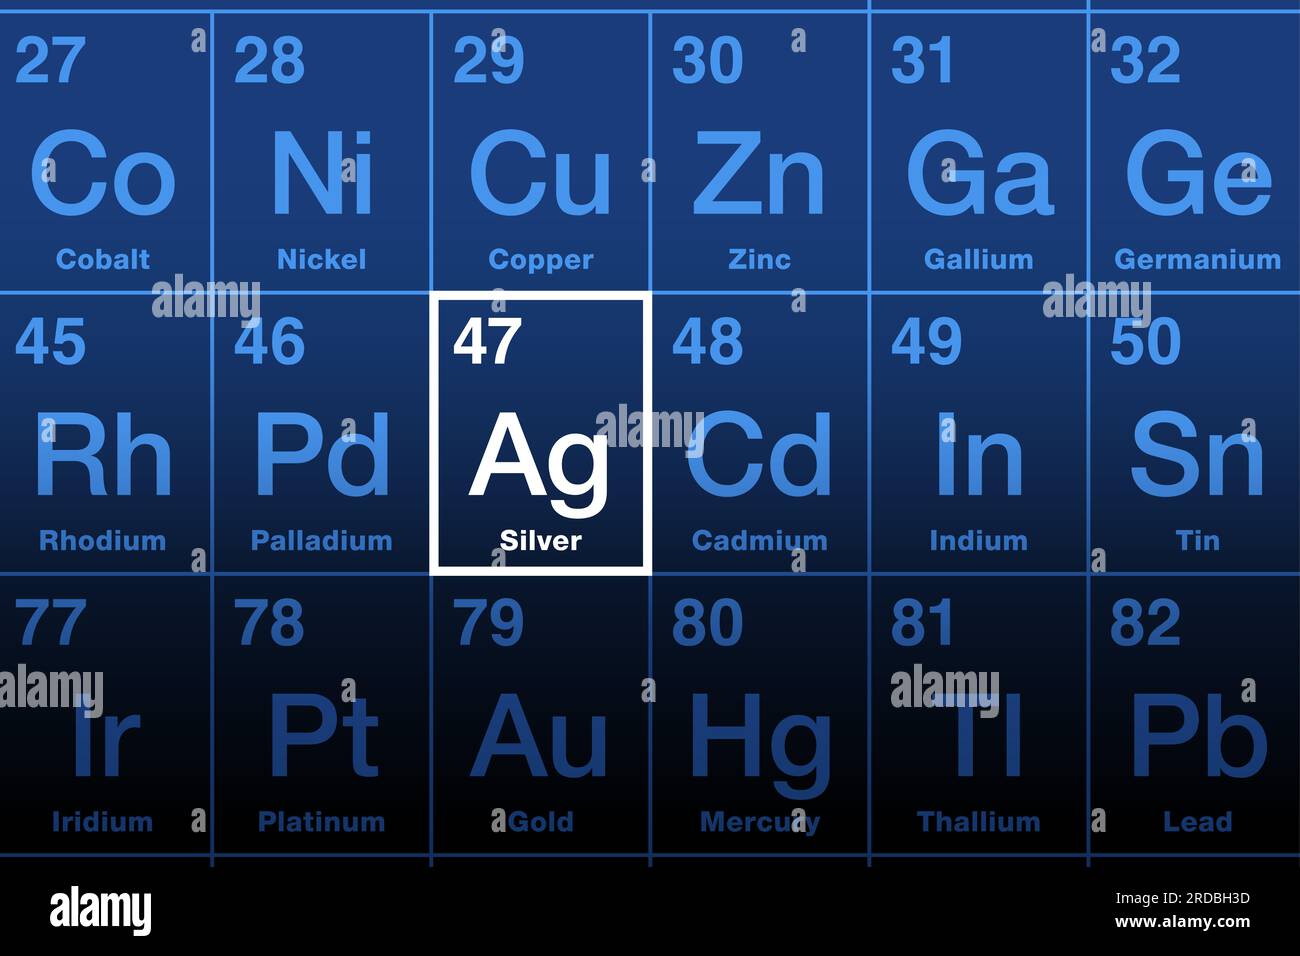 Silver on periodic table of the elements. Precious metal with chemical symbol Ag (Latin argentum), and atomic number 47. Stock Photo